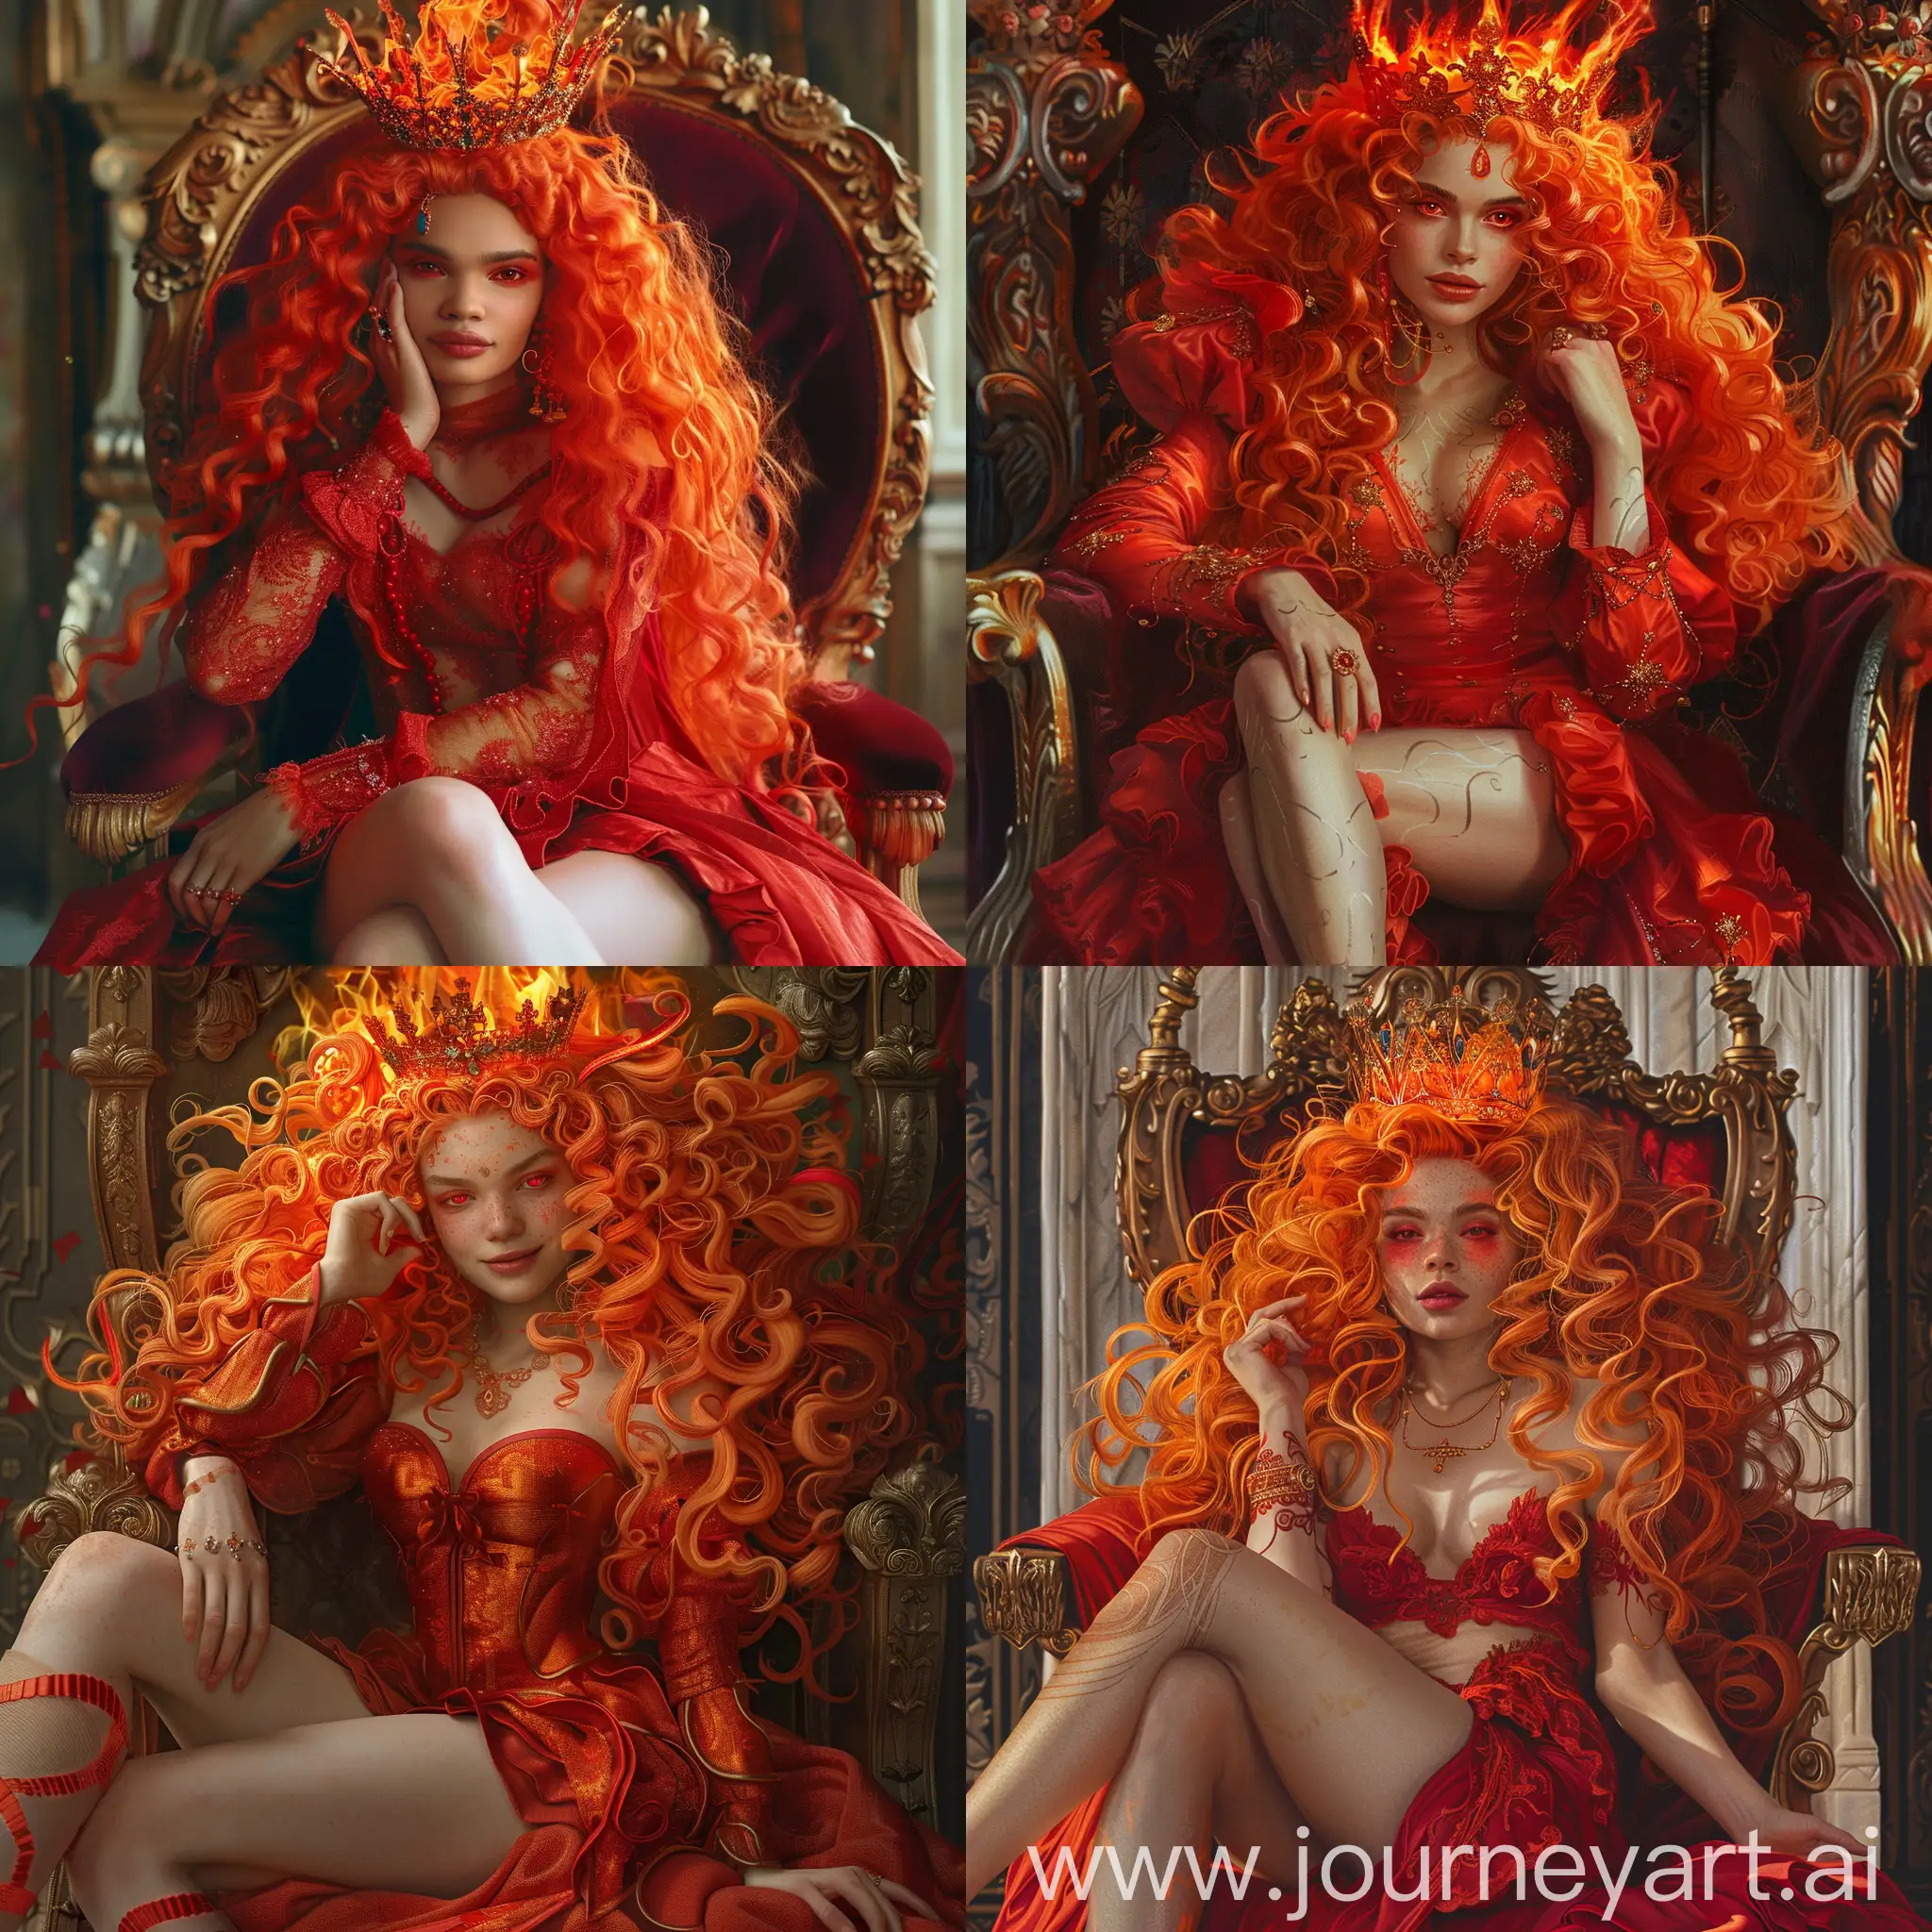 Fiery-Goddess-on-Royal-Throne-Elegant-Figure-with-Red-Hair-and-Flame-Crown